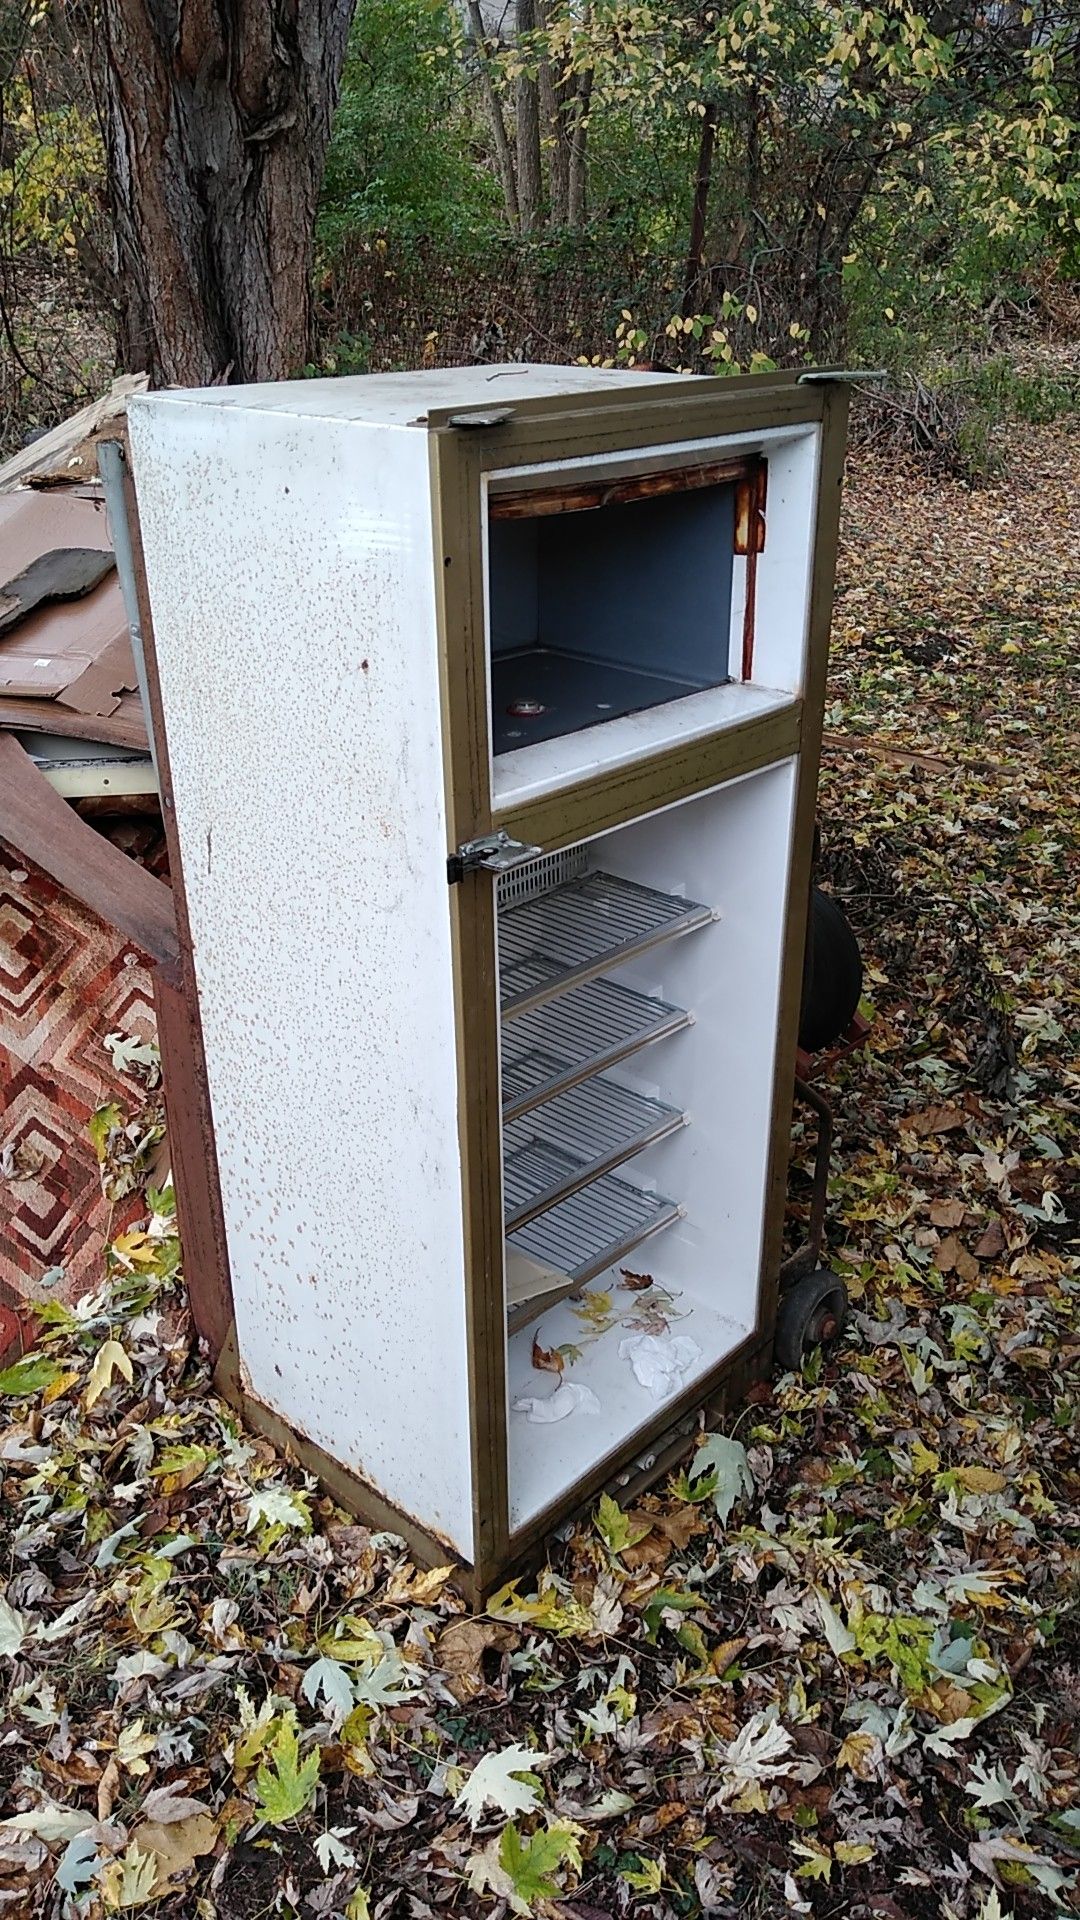 RV Refrigerator. Runs on electric and propane. Needs refurbished, but works great.